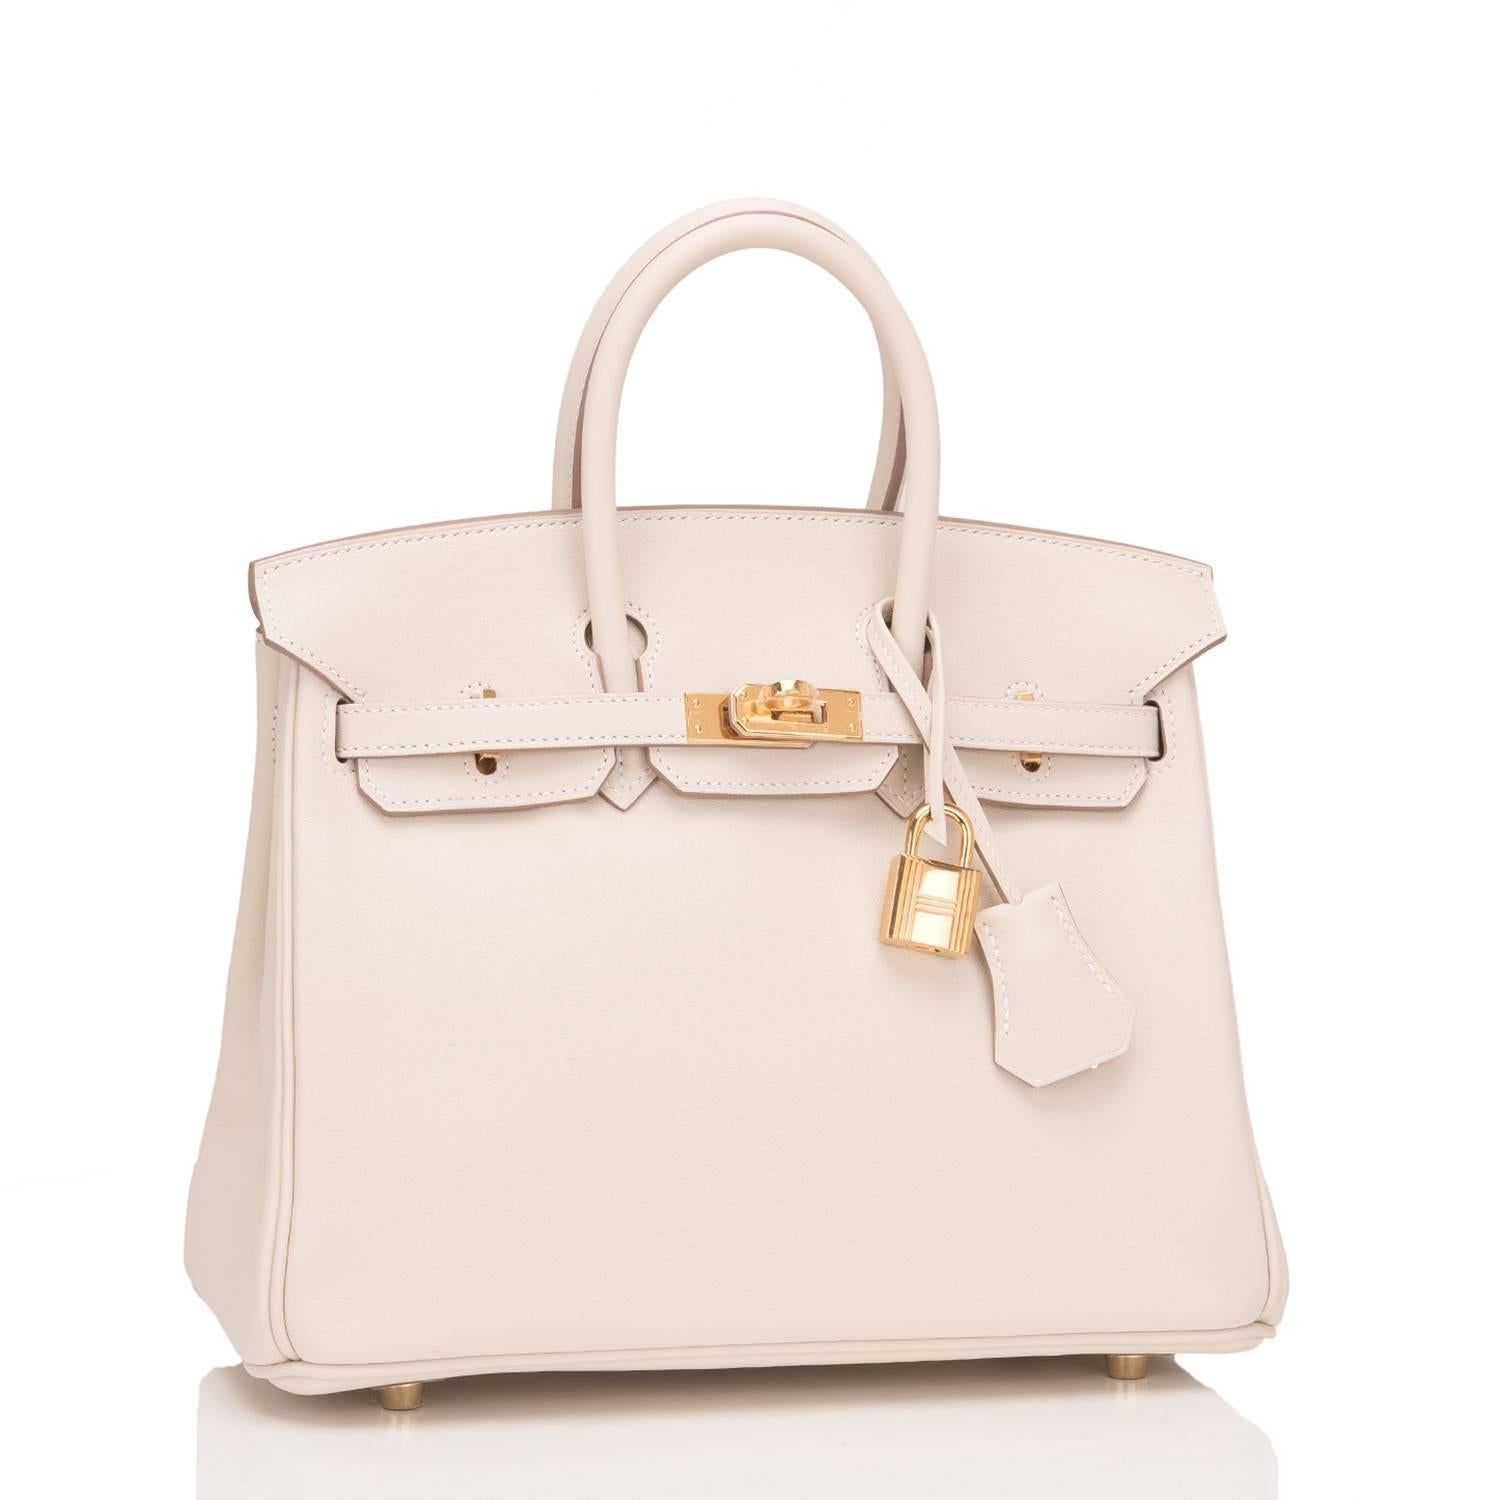 Hermes Craie Birkin 25cm of swift leather with gold hardware.

This Birkin has tonal stitching, a front toggle closure, a clochette with lock and two keys, and double rolled handles.

The interior is lined with Criae chevre and has one zip pocket